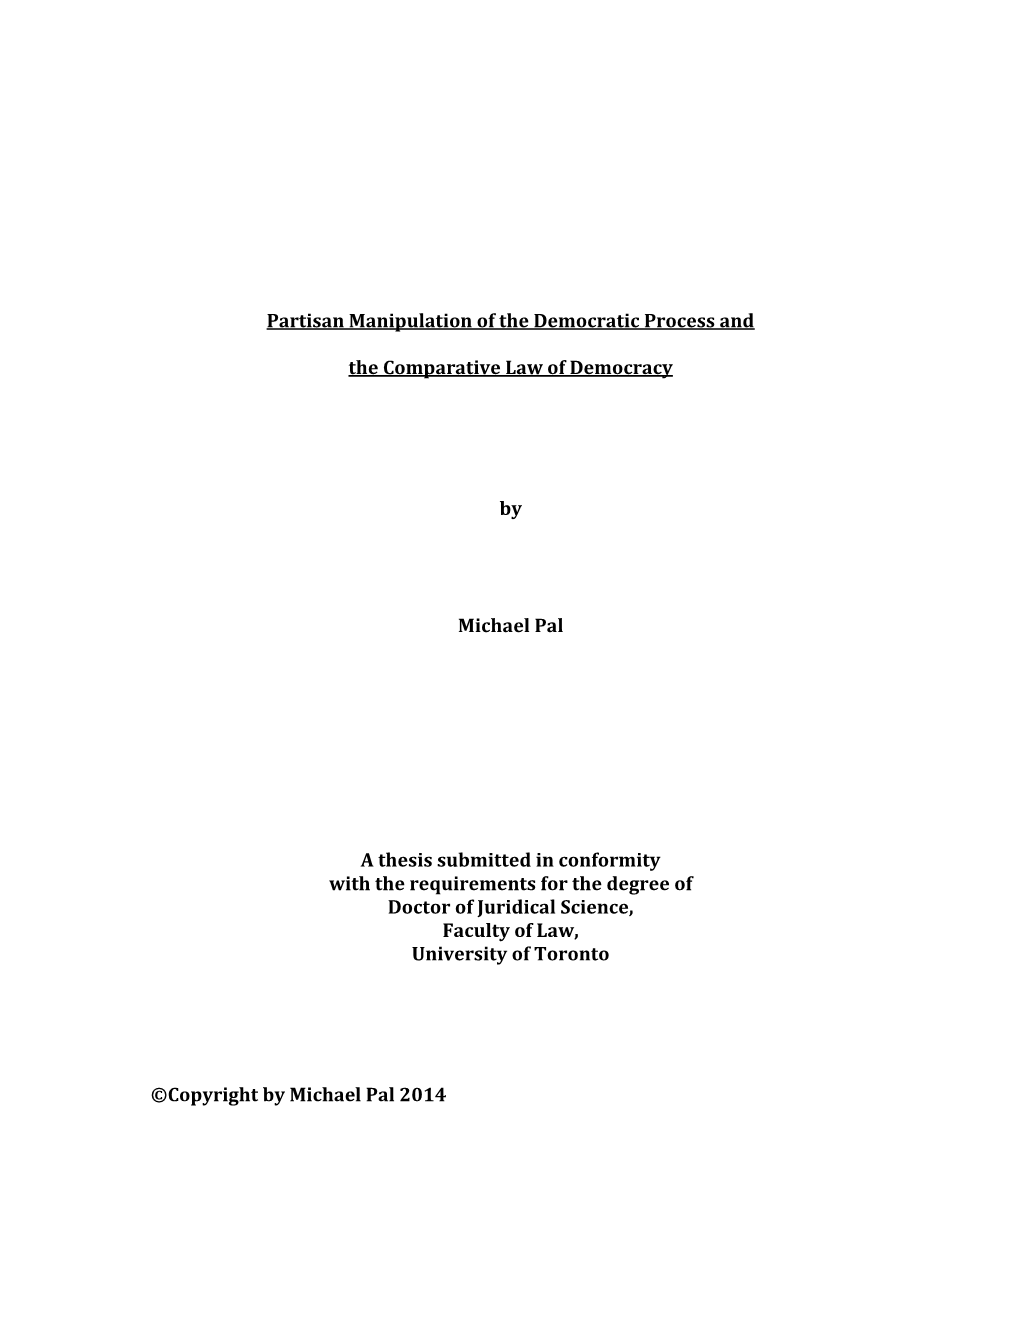 Partisan Manipulation of the Democratic Process and the Comparative Law of Democracy by Michael Pal a Thesis Submitted in Confo